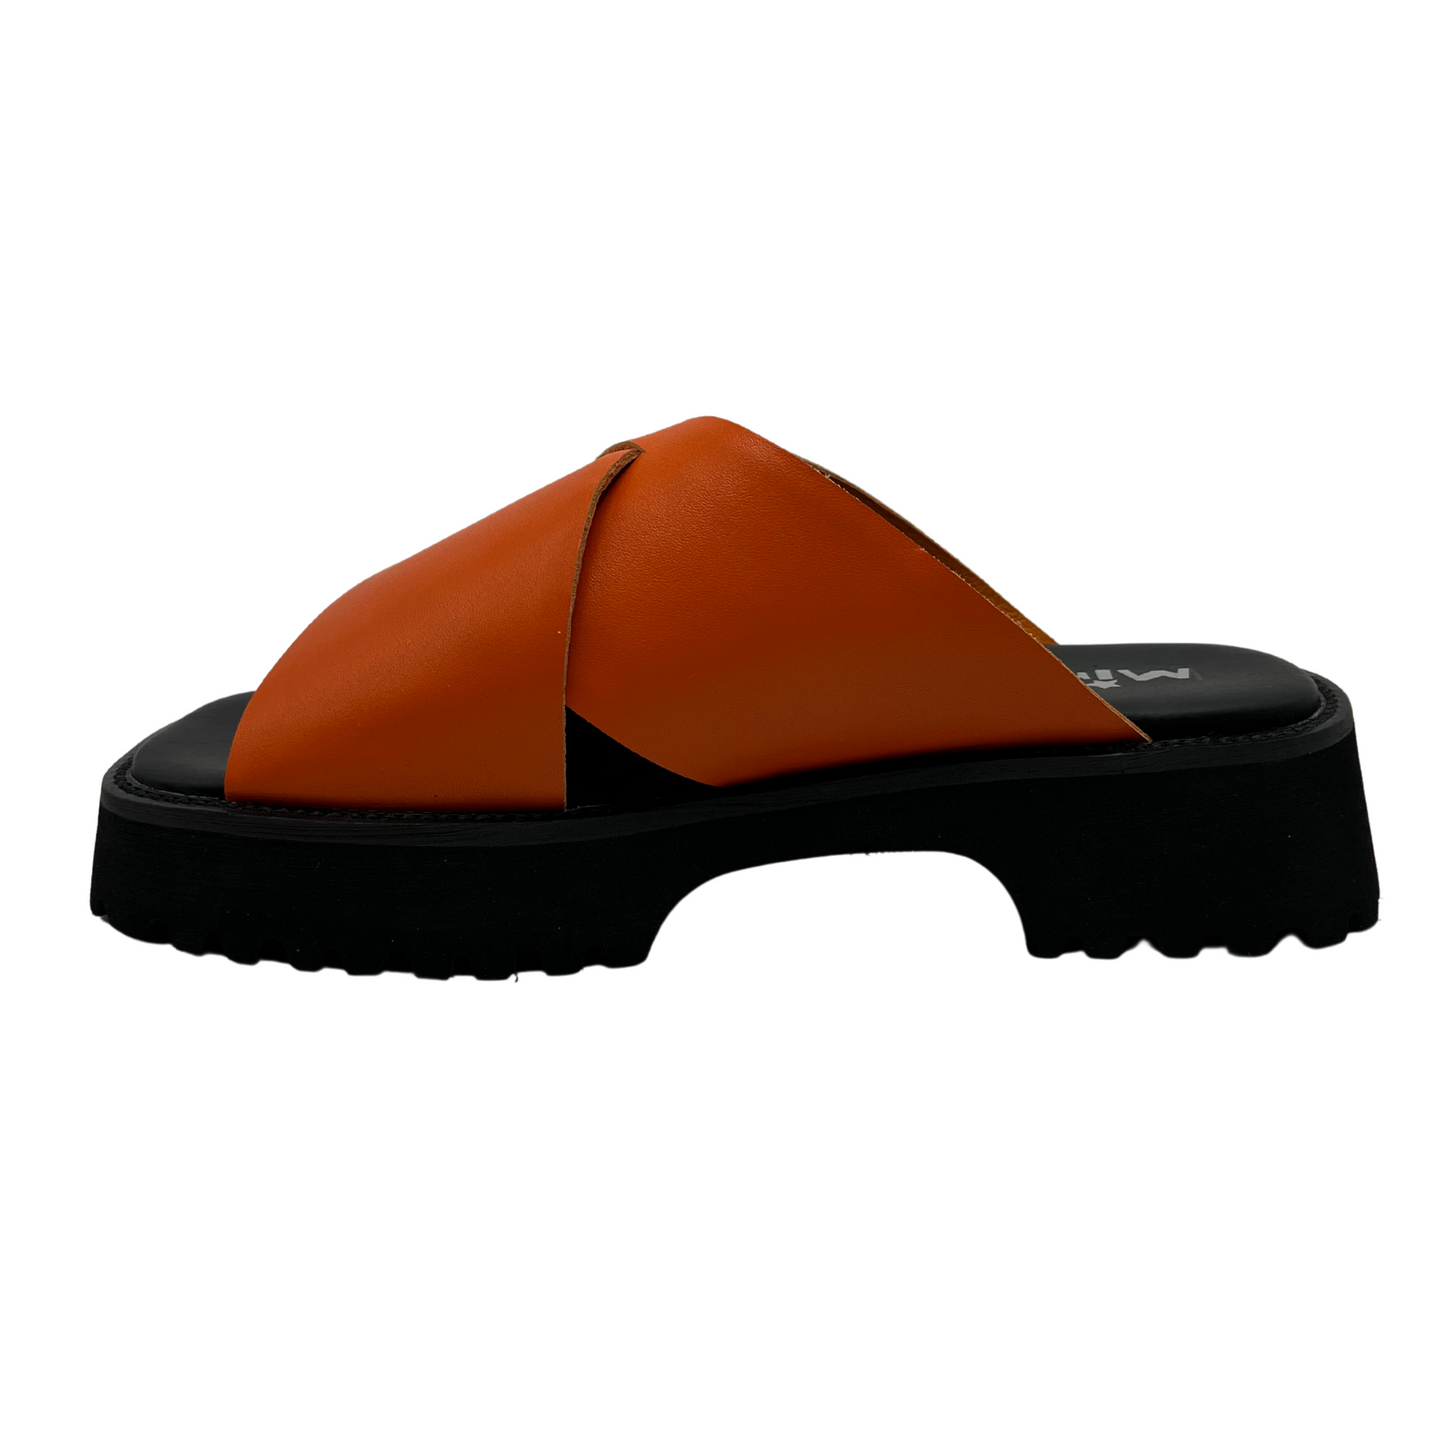 Left facing view of orange leather sandal with thick black sole, cross over straps and open toe